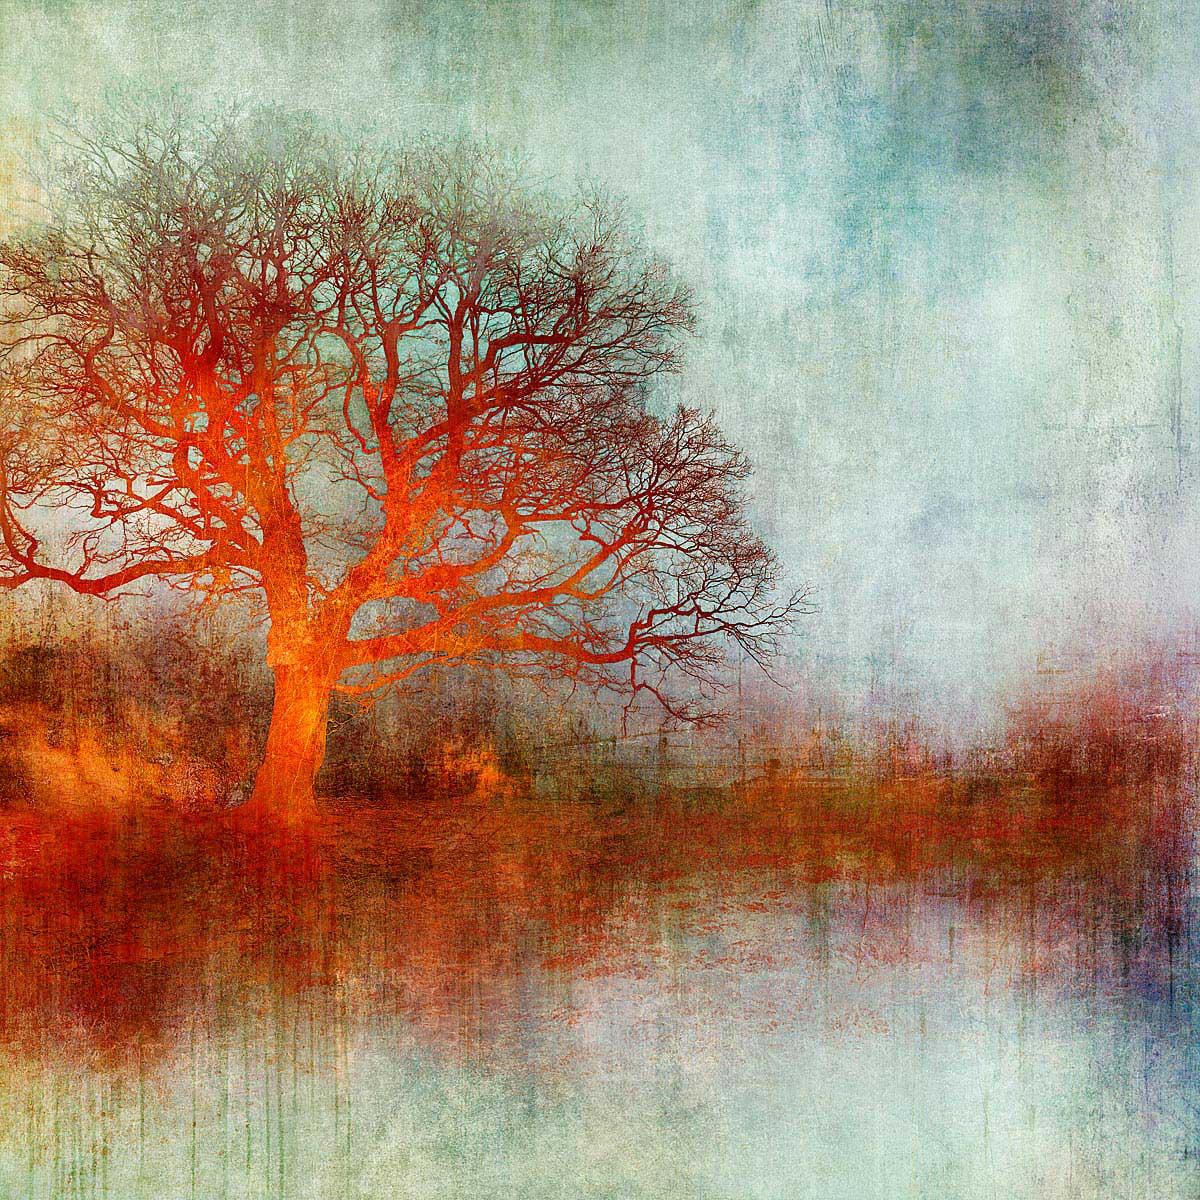 First Light - Colourful, Bright, Atmospheric, Tree, Nature, Digital Art